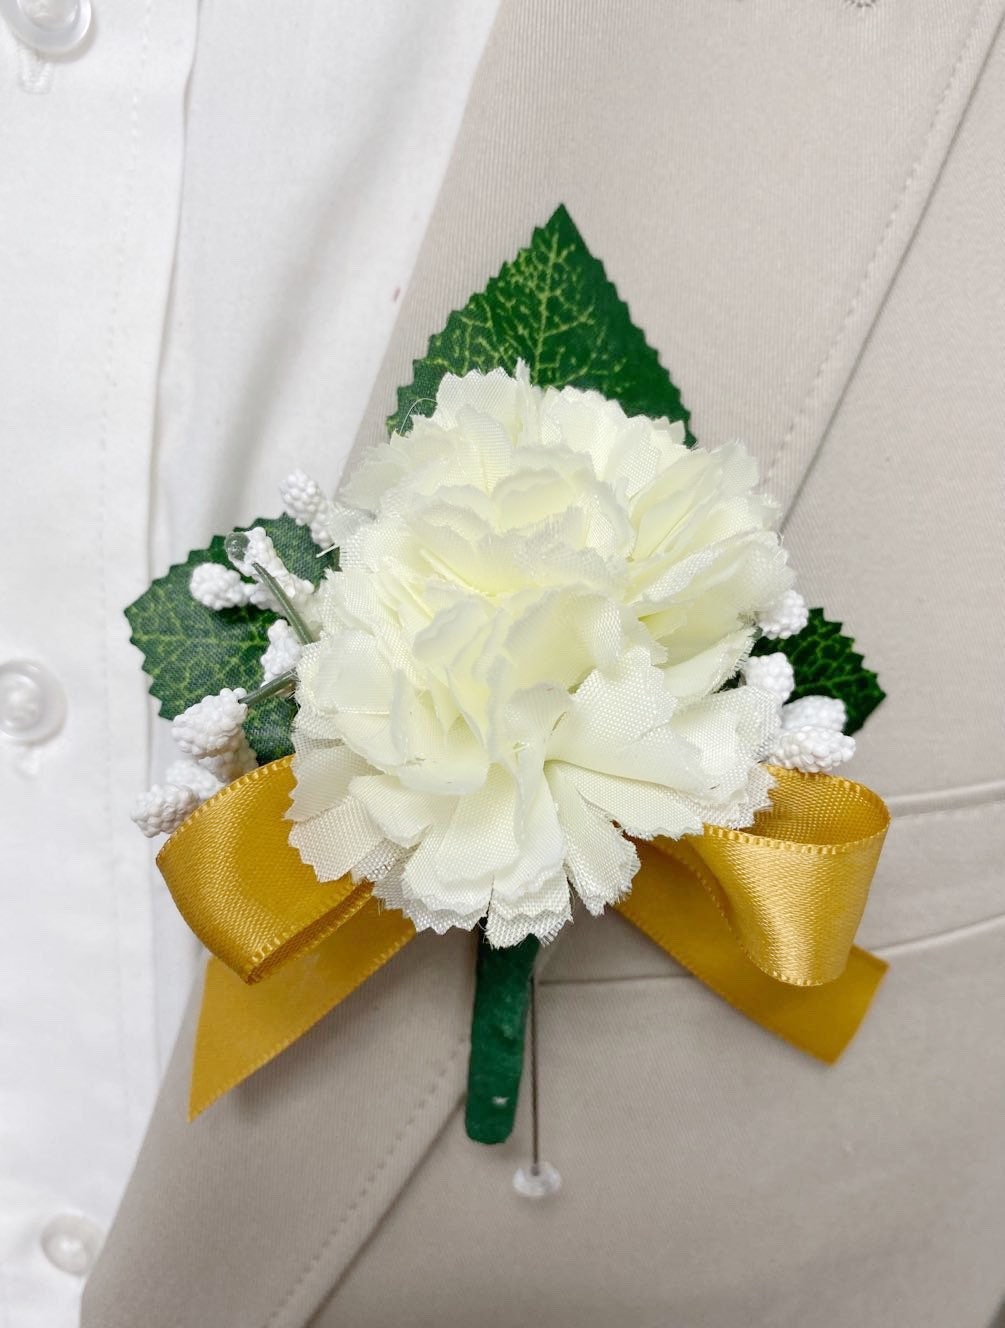 Elegant Artificial Carnation Boutonniere with Baby's Breath - White & Ivory